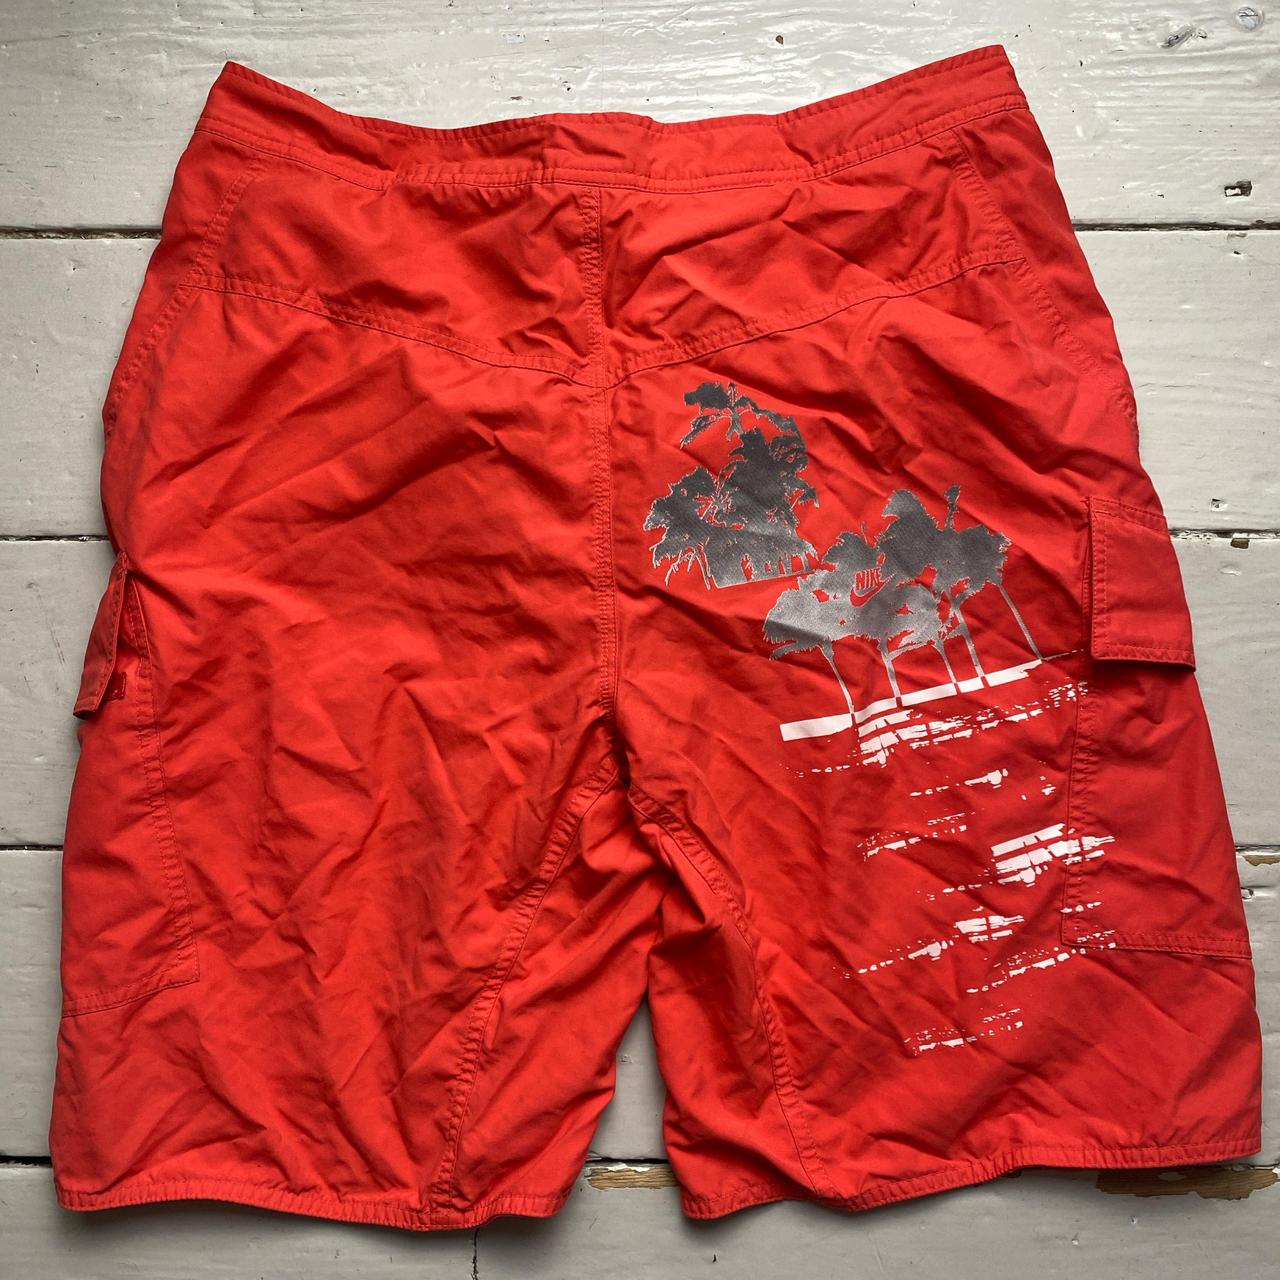 Nike Vintage Red Grey and White Baggy Cargo Shorts